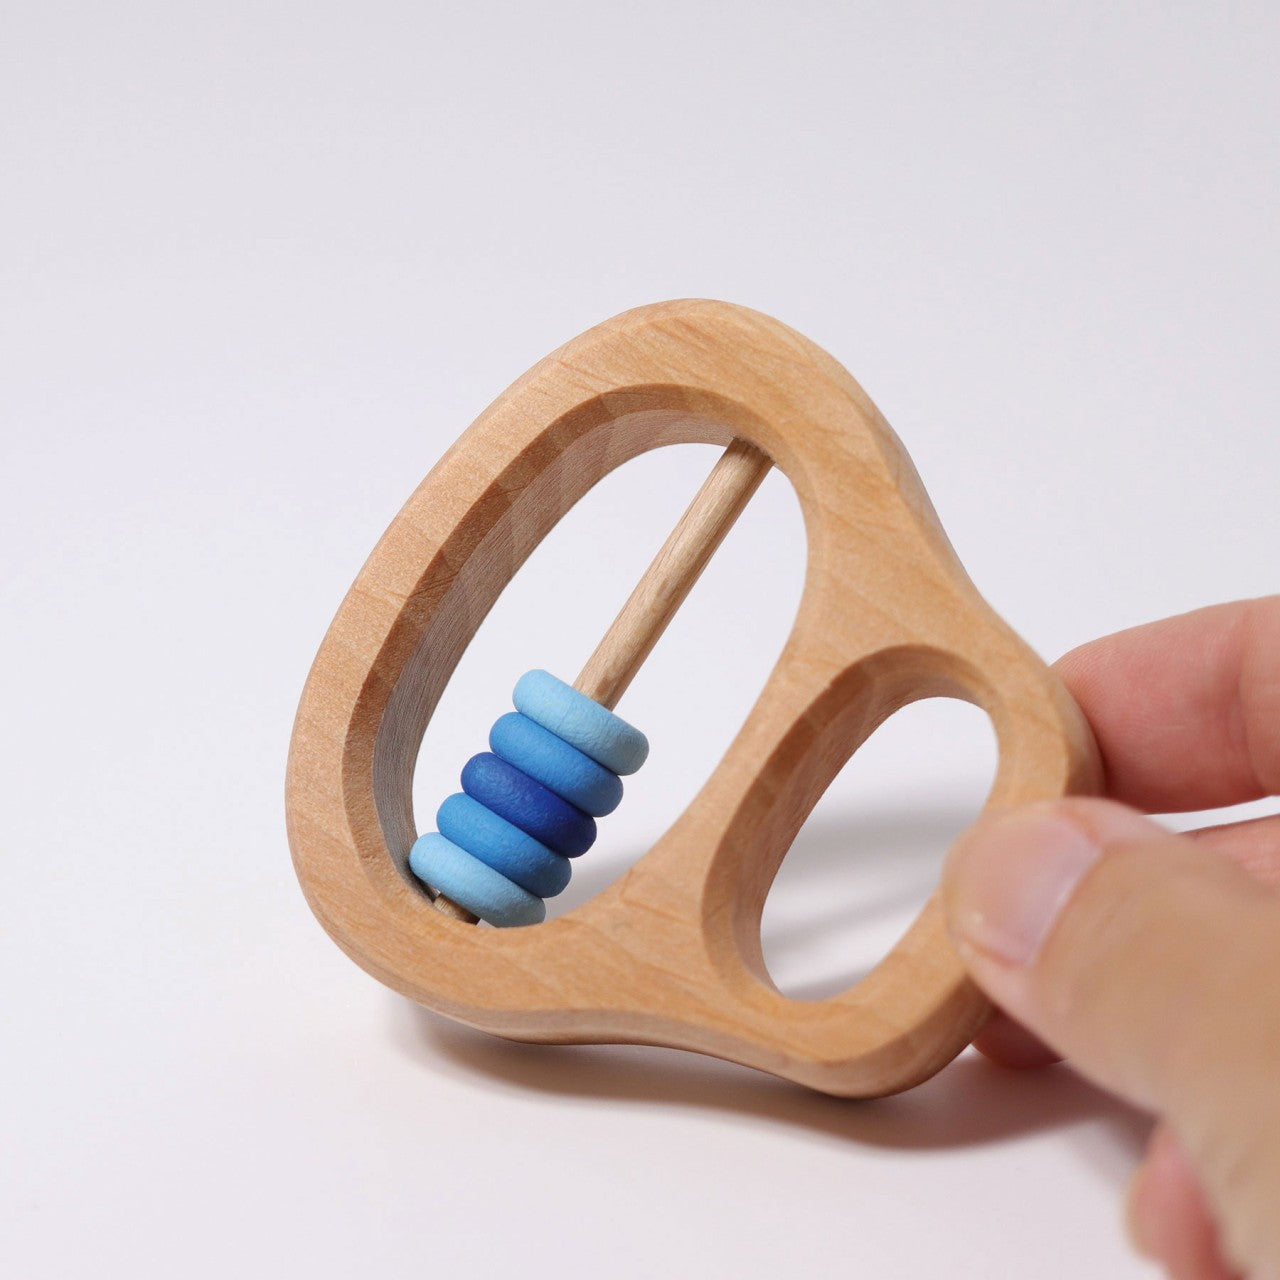 5 Blue Rings Rattle & Clutching Toy | Baby’s First Wooden Toy